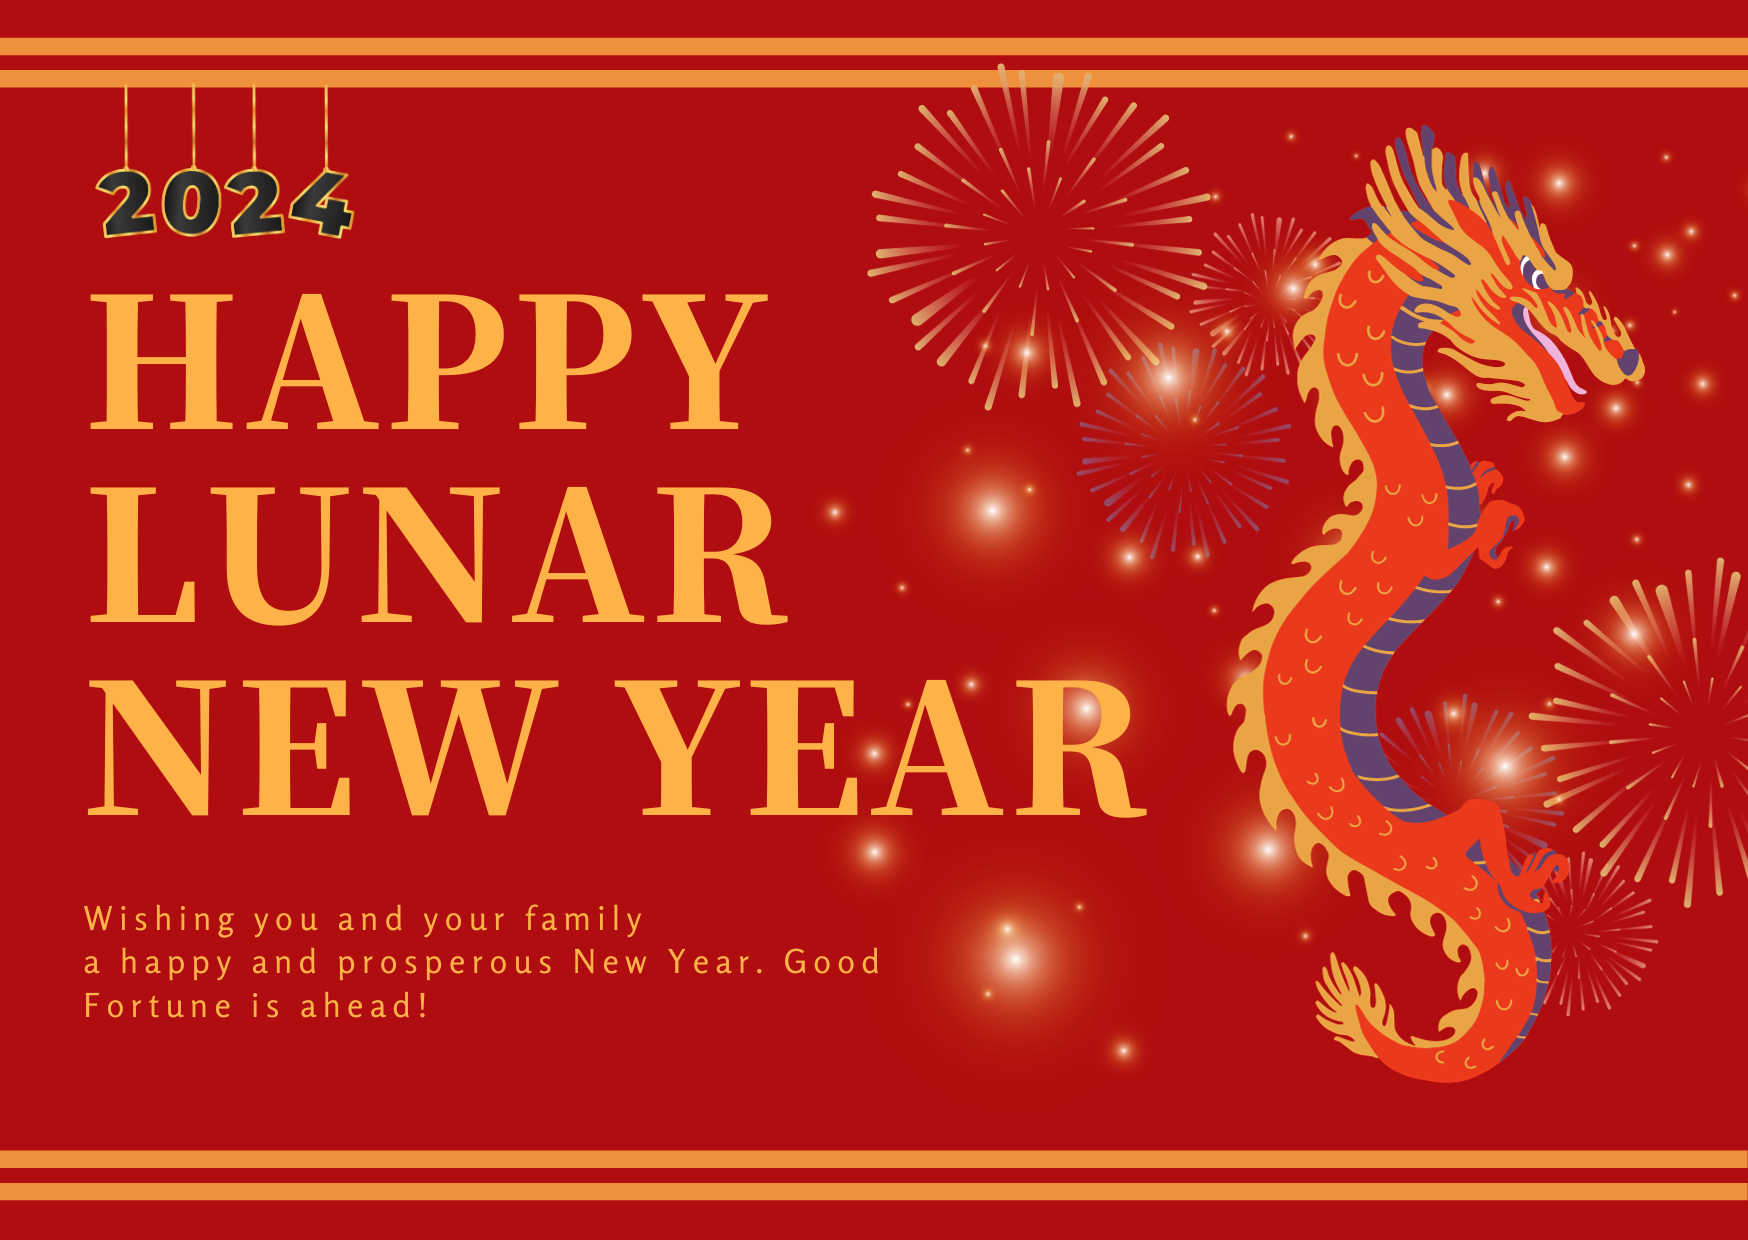 Happy Lunar New Year! - DeGroote School of Business